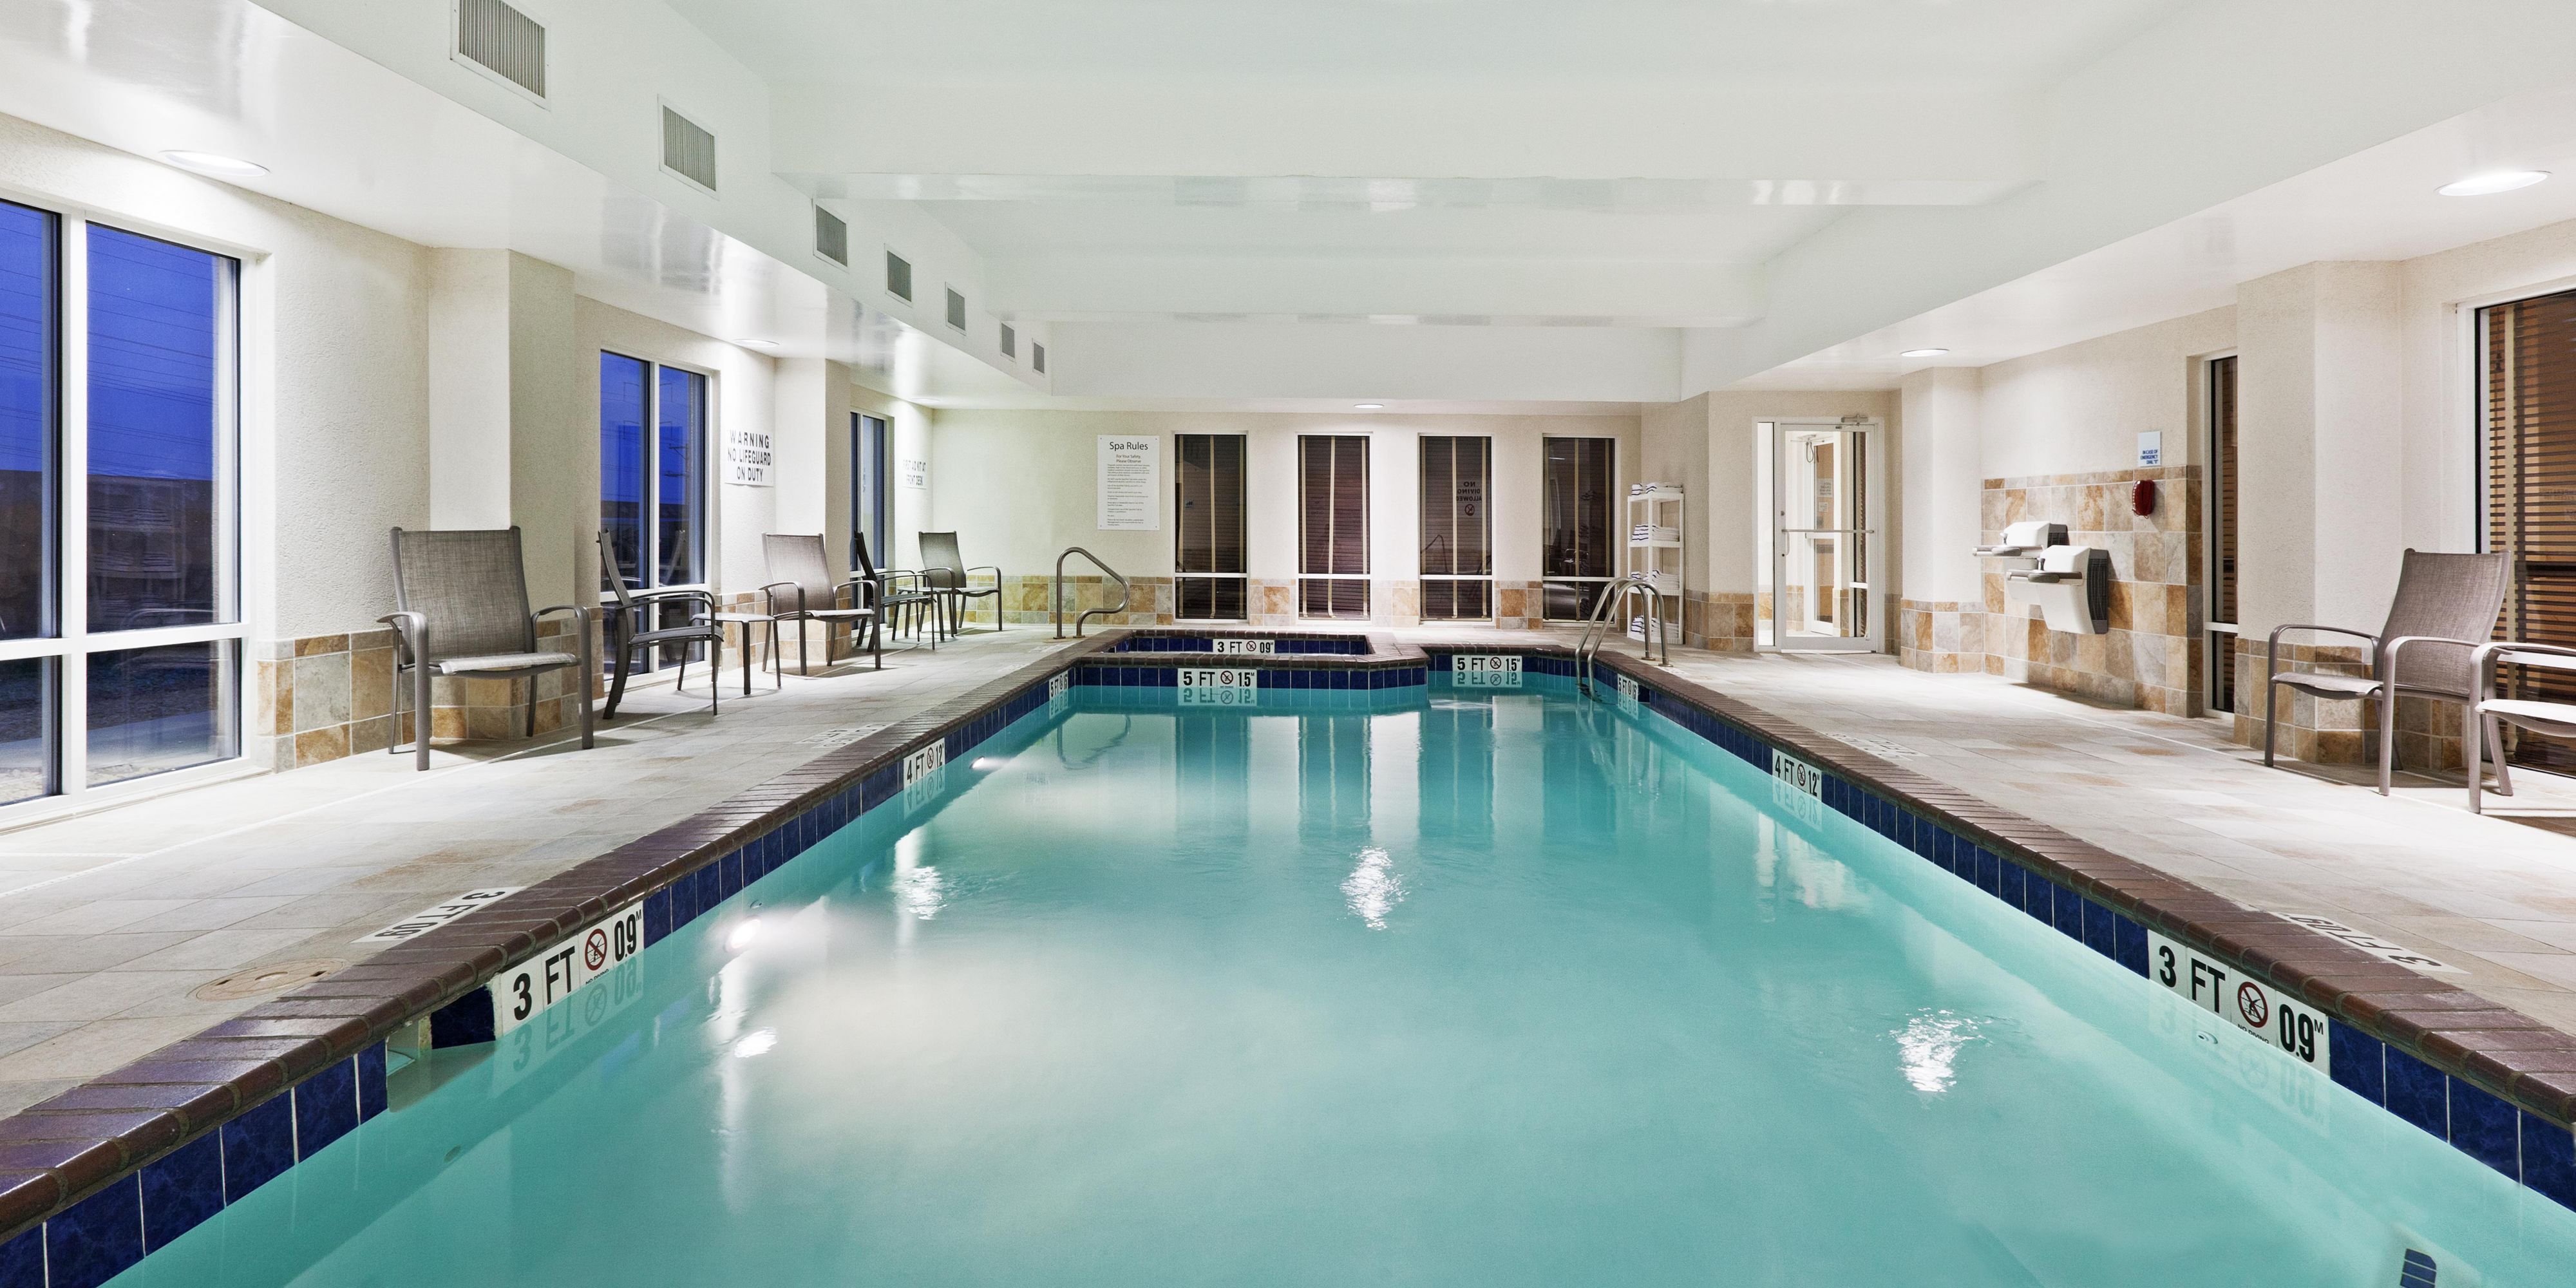 After a long day of either work or play, take time to enjoy a swim in our indoor heated pool, anytime of the year.